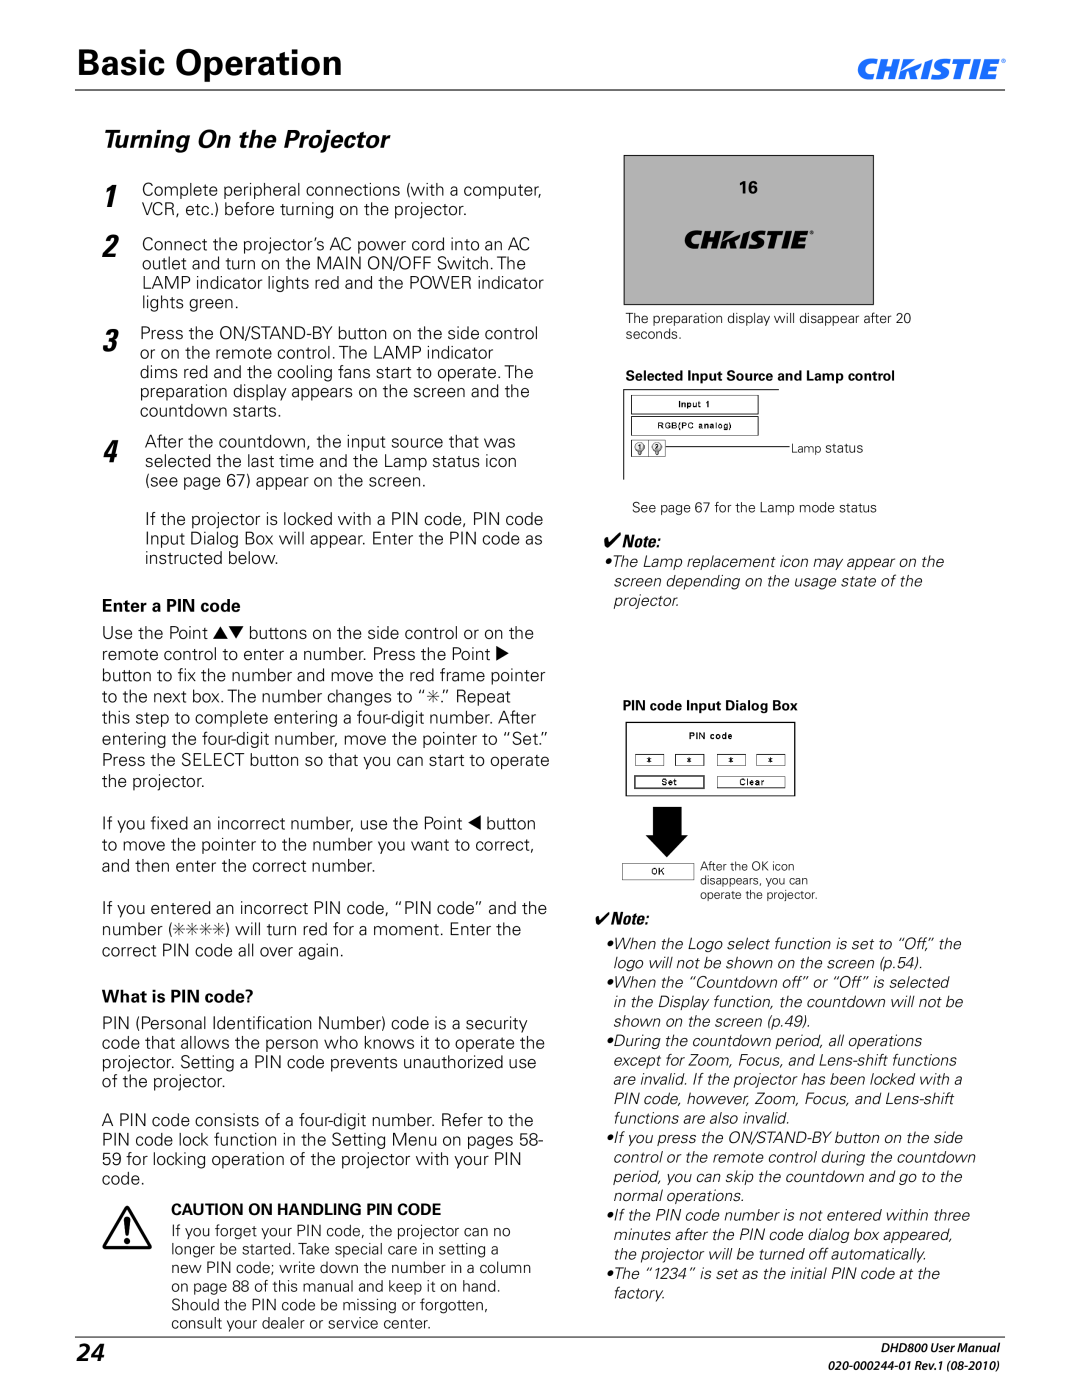 Christie Digital Systems DHD800 user manual Basic Operation, Turning On the Projector 